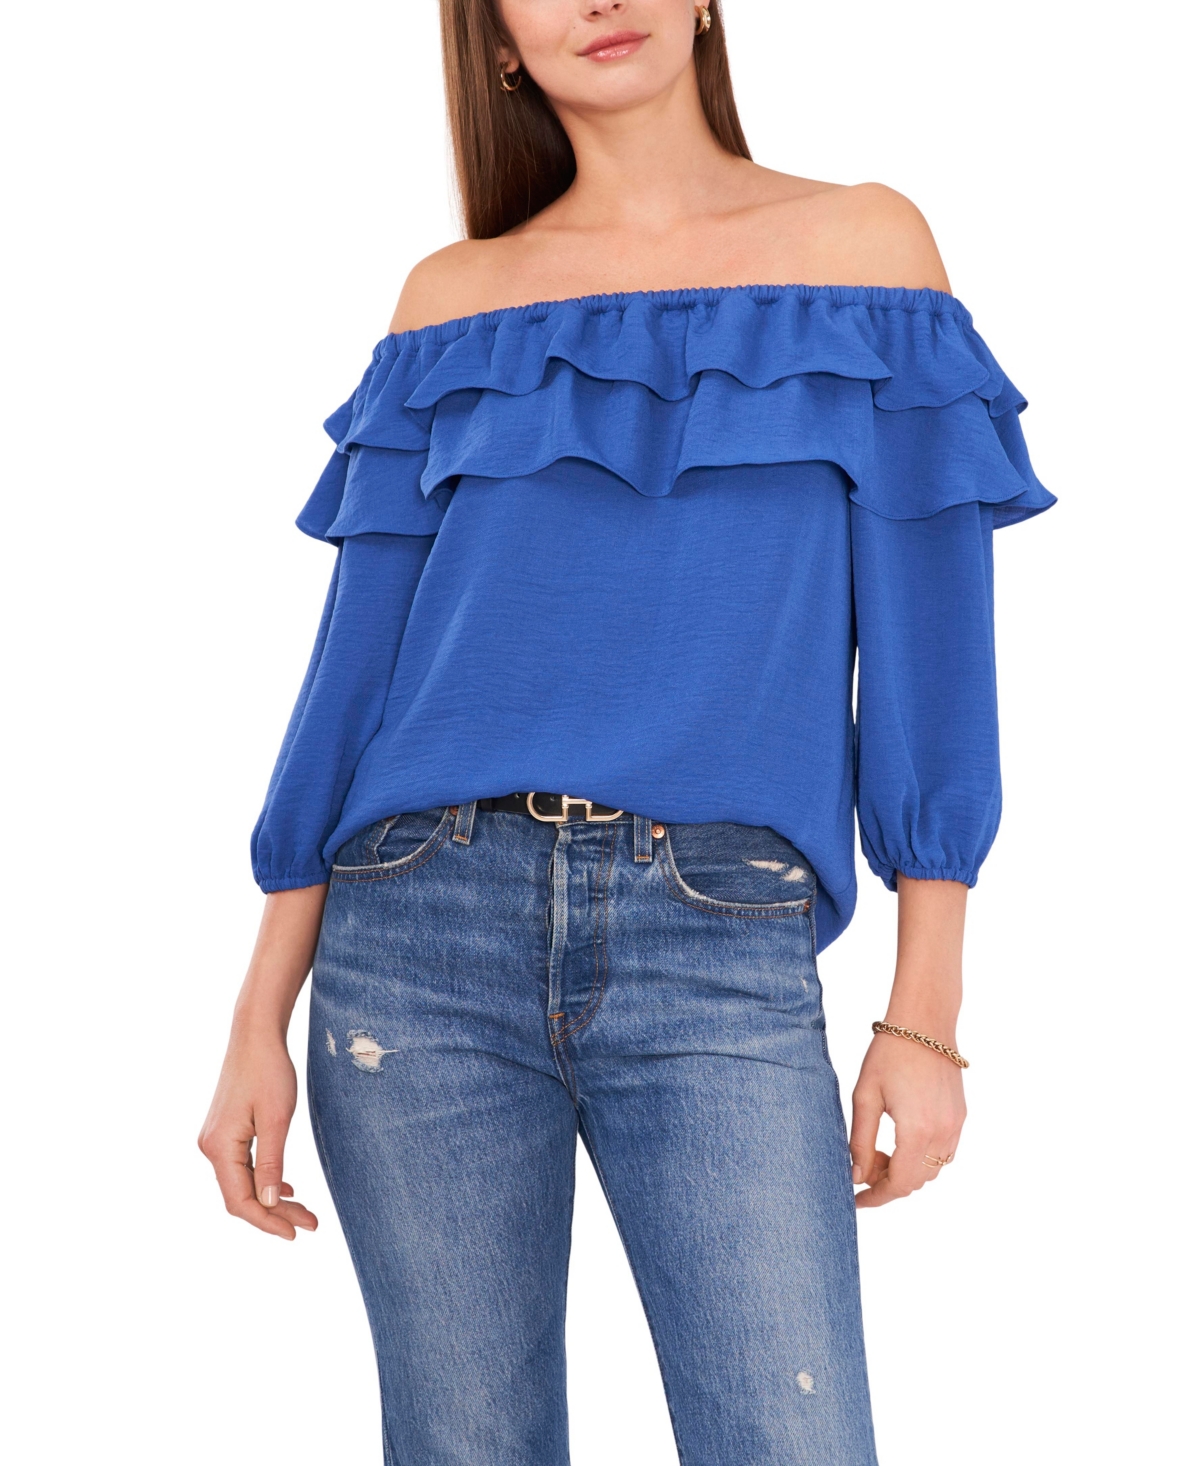 Vince Camuto Women's 3/4 Sleeve Off Shoulder Ruffle Blouse